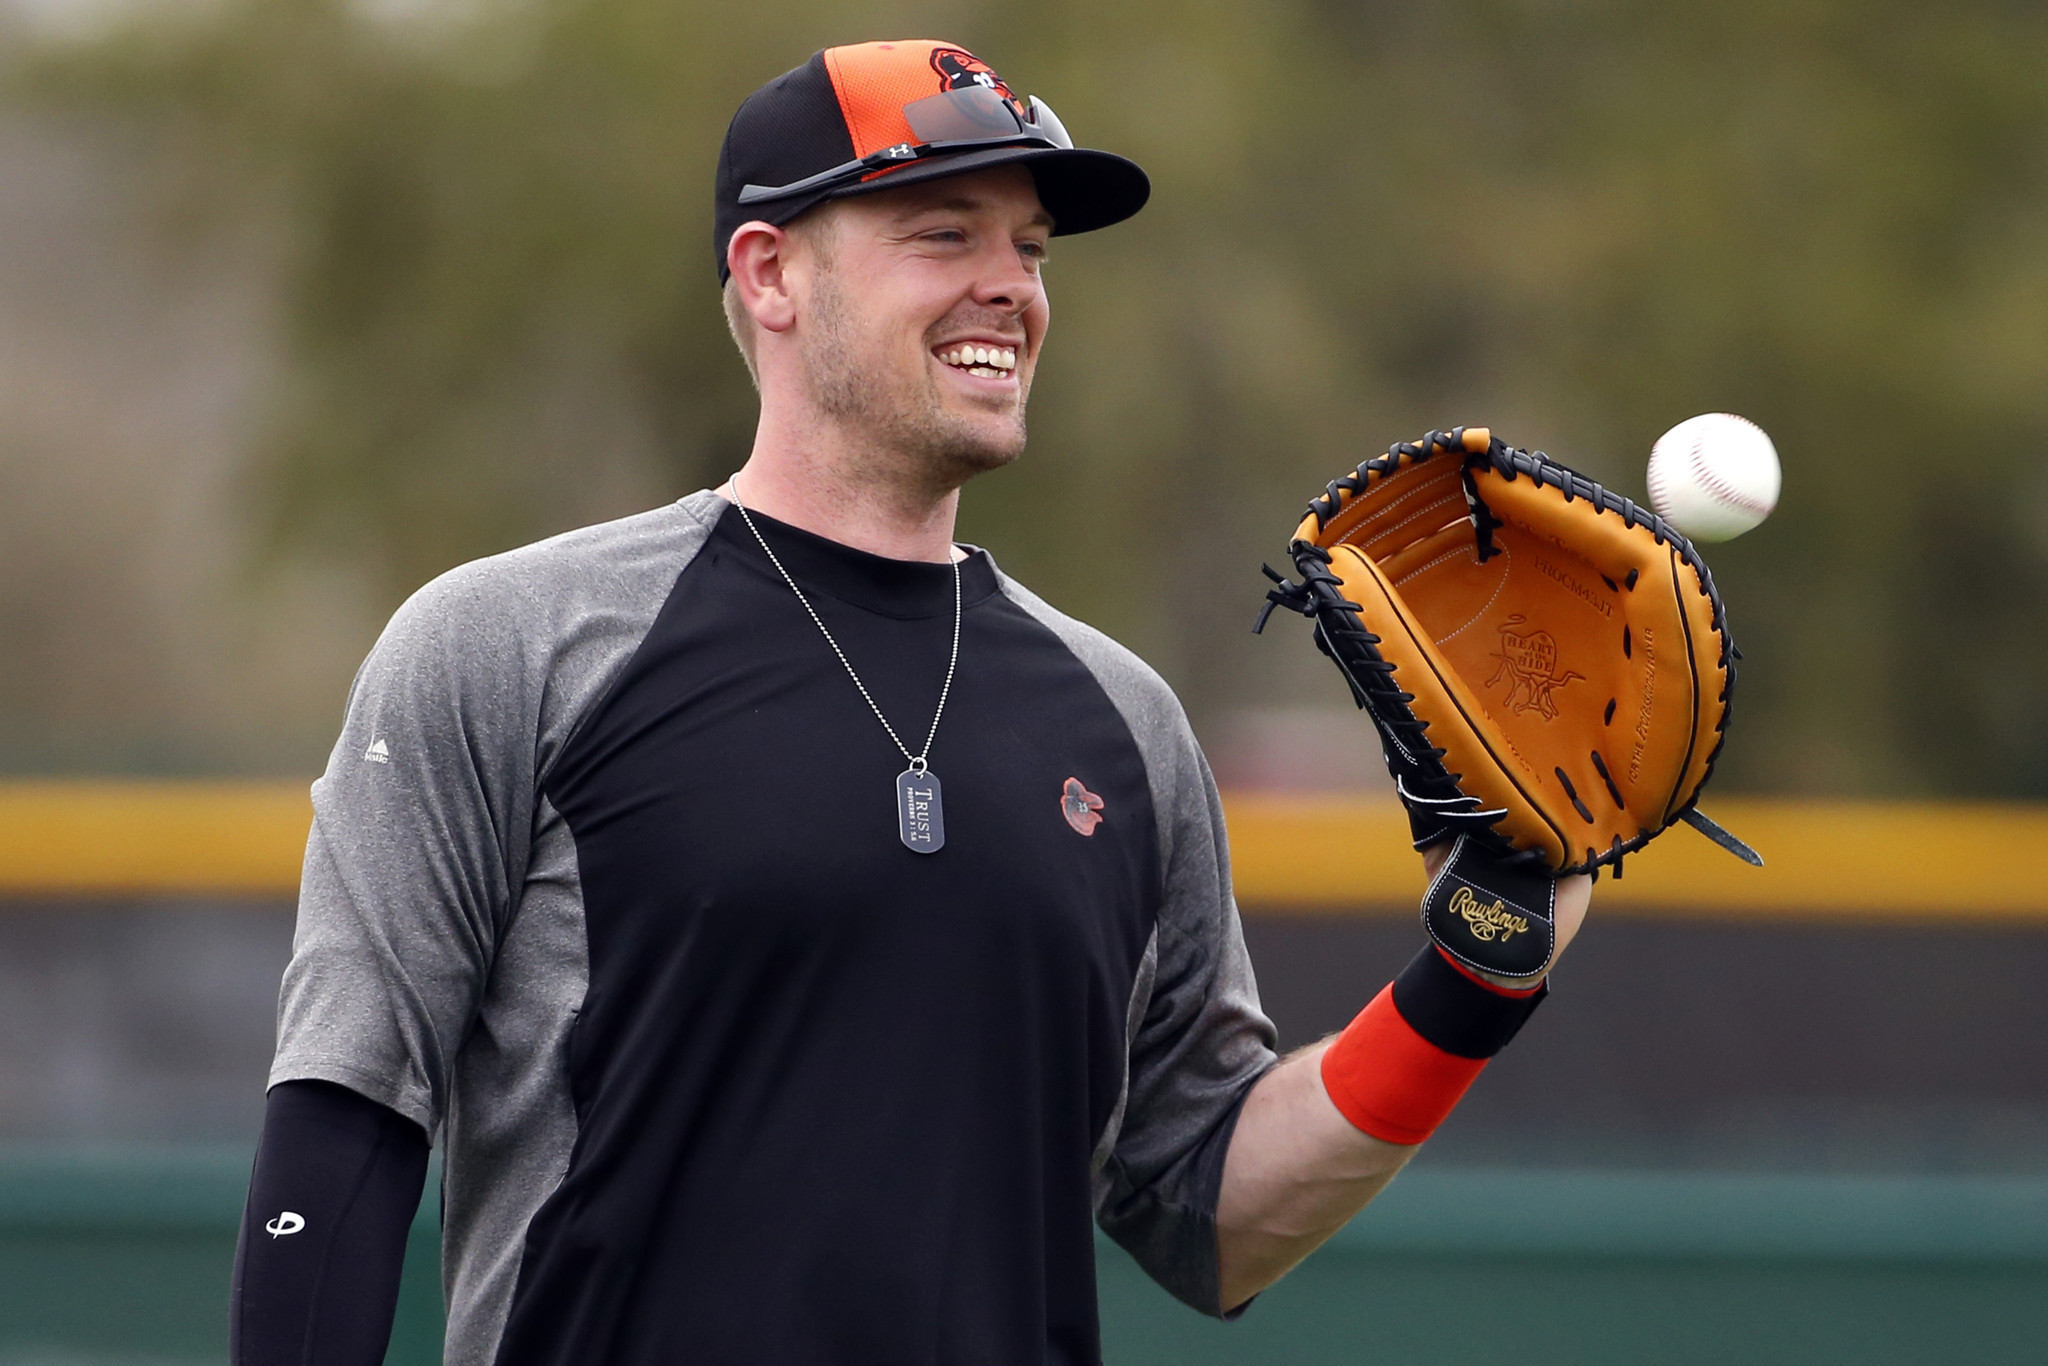 Report: Rays Have Made Contract Offer to Matt Wieters